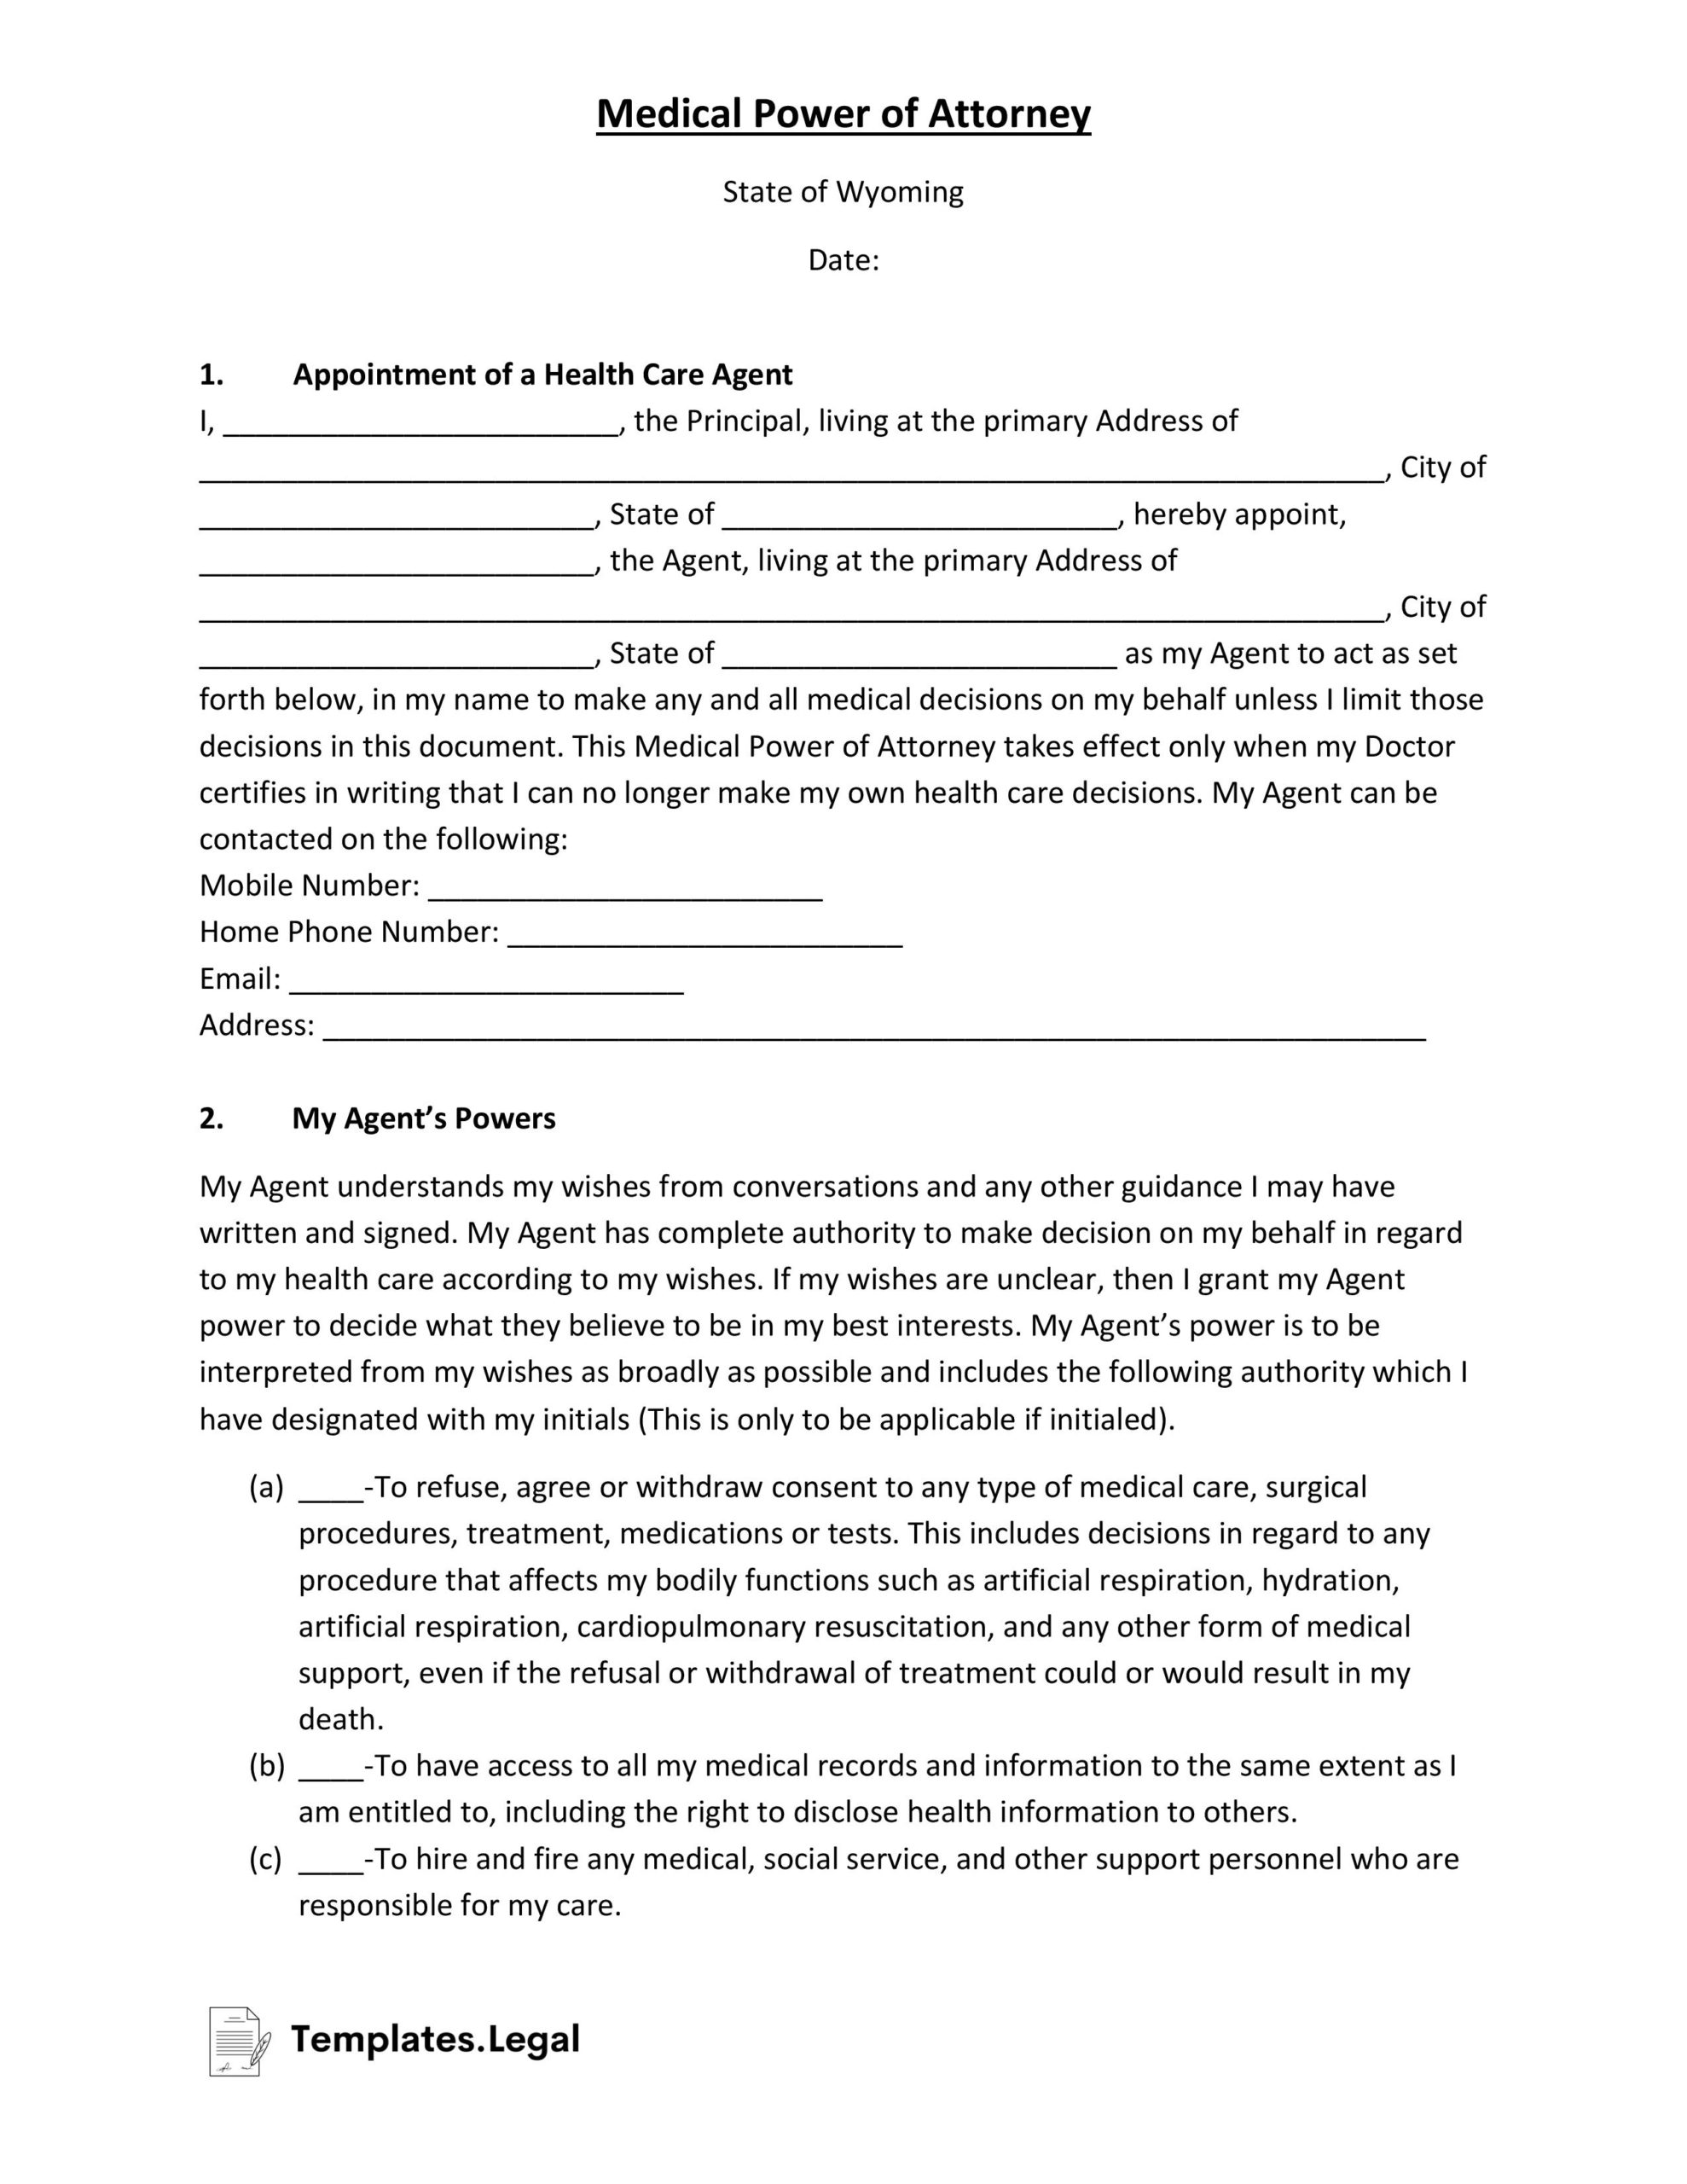 Wyoming Medical Power of Attorney- Templates.Legal